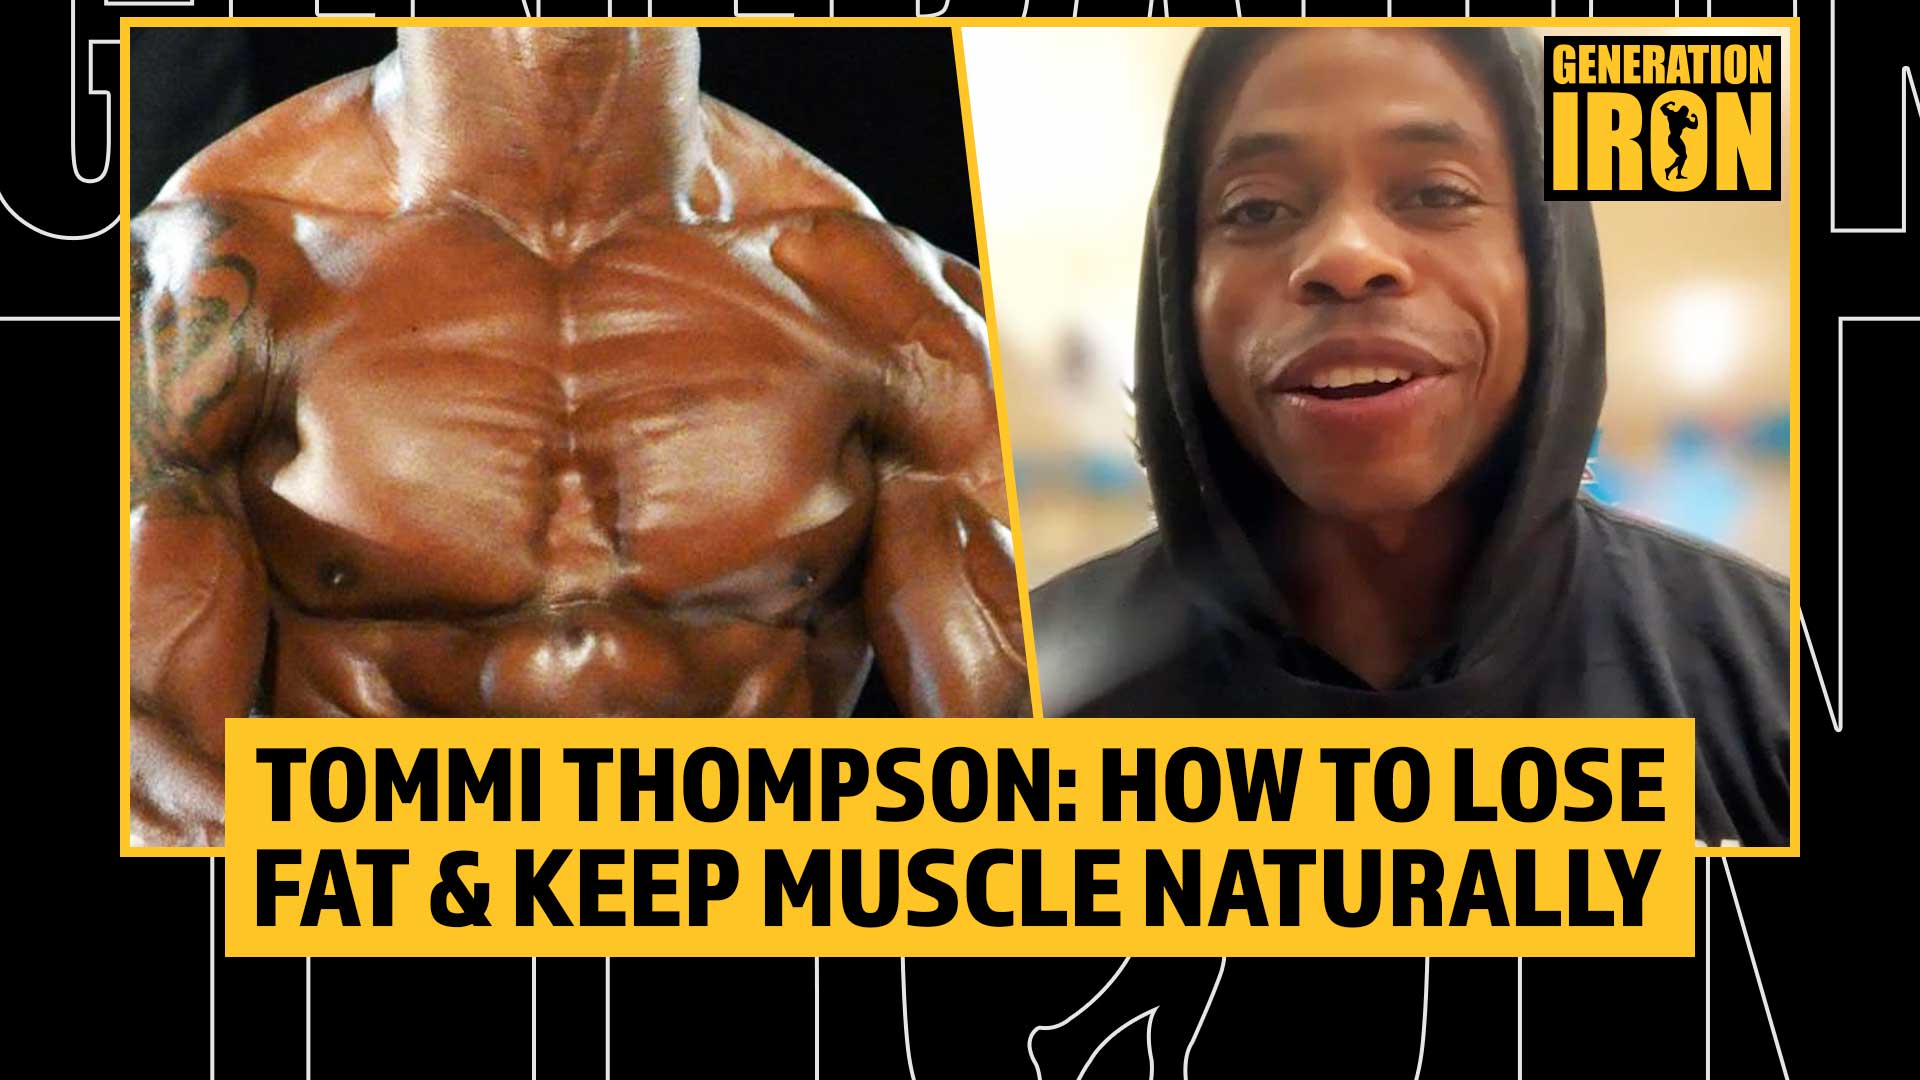 PNBA Bodybuilder Tommi Thompson: The All-Natural Way To Burn Fat Without Losing Muscle